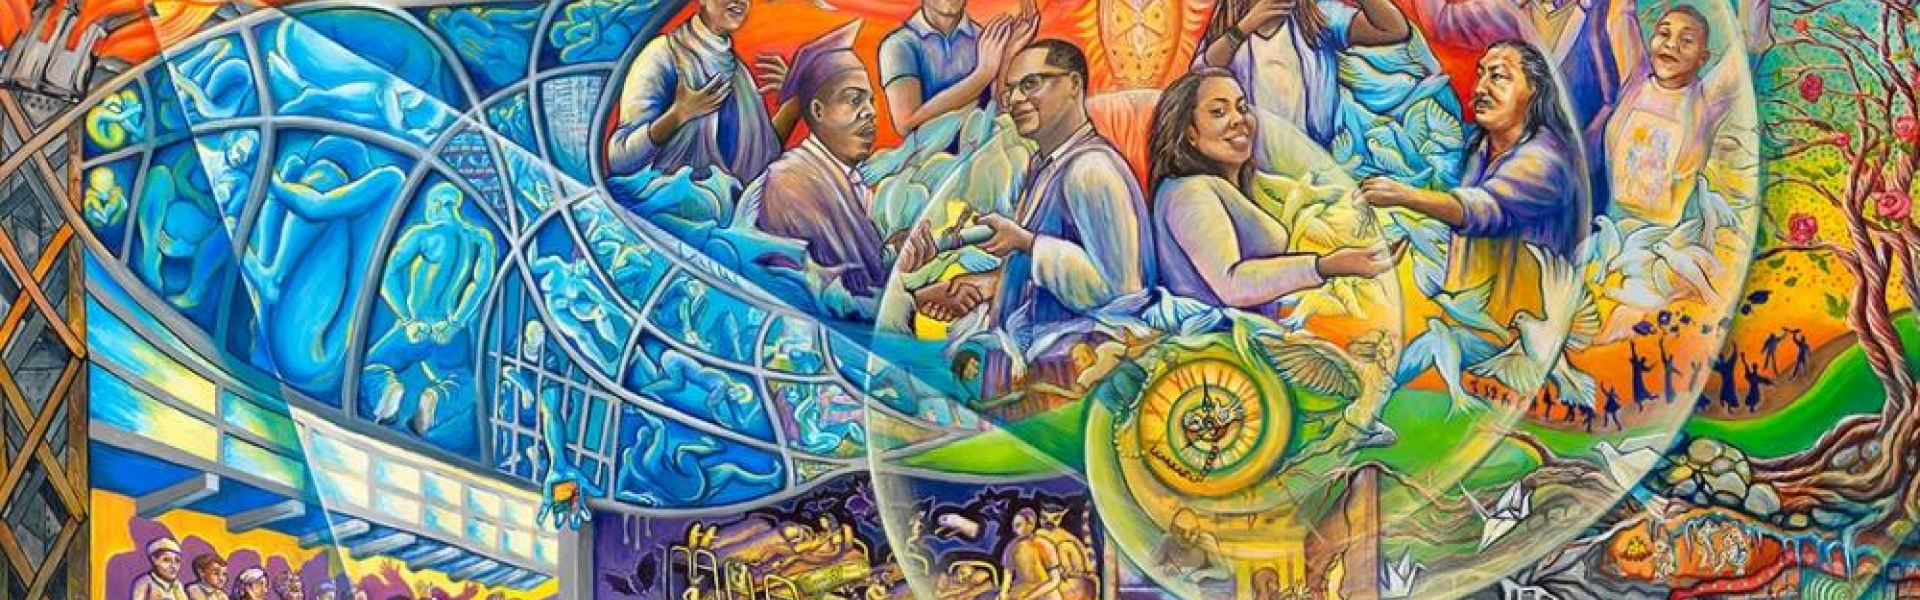 Mural depicting multiple scenes of  incarceration, doves of peace, education